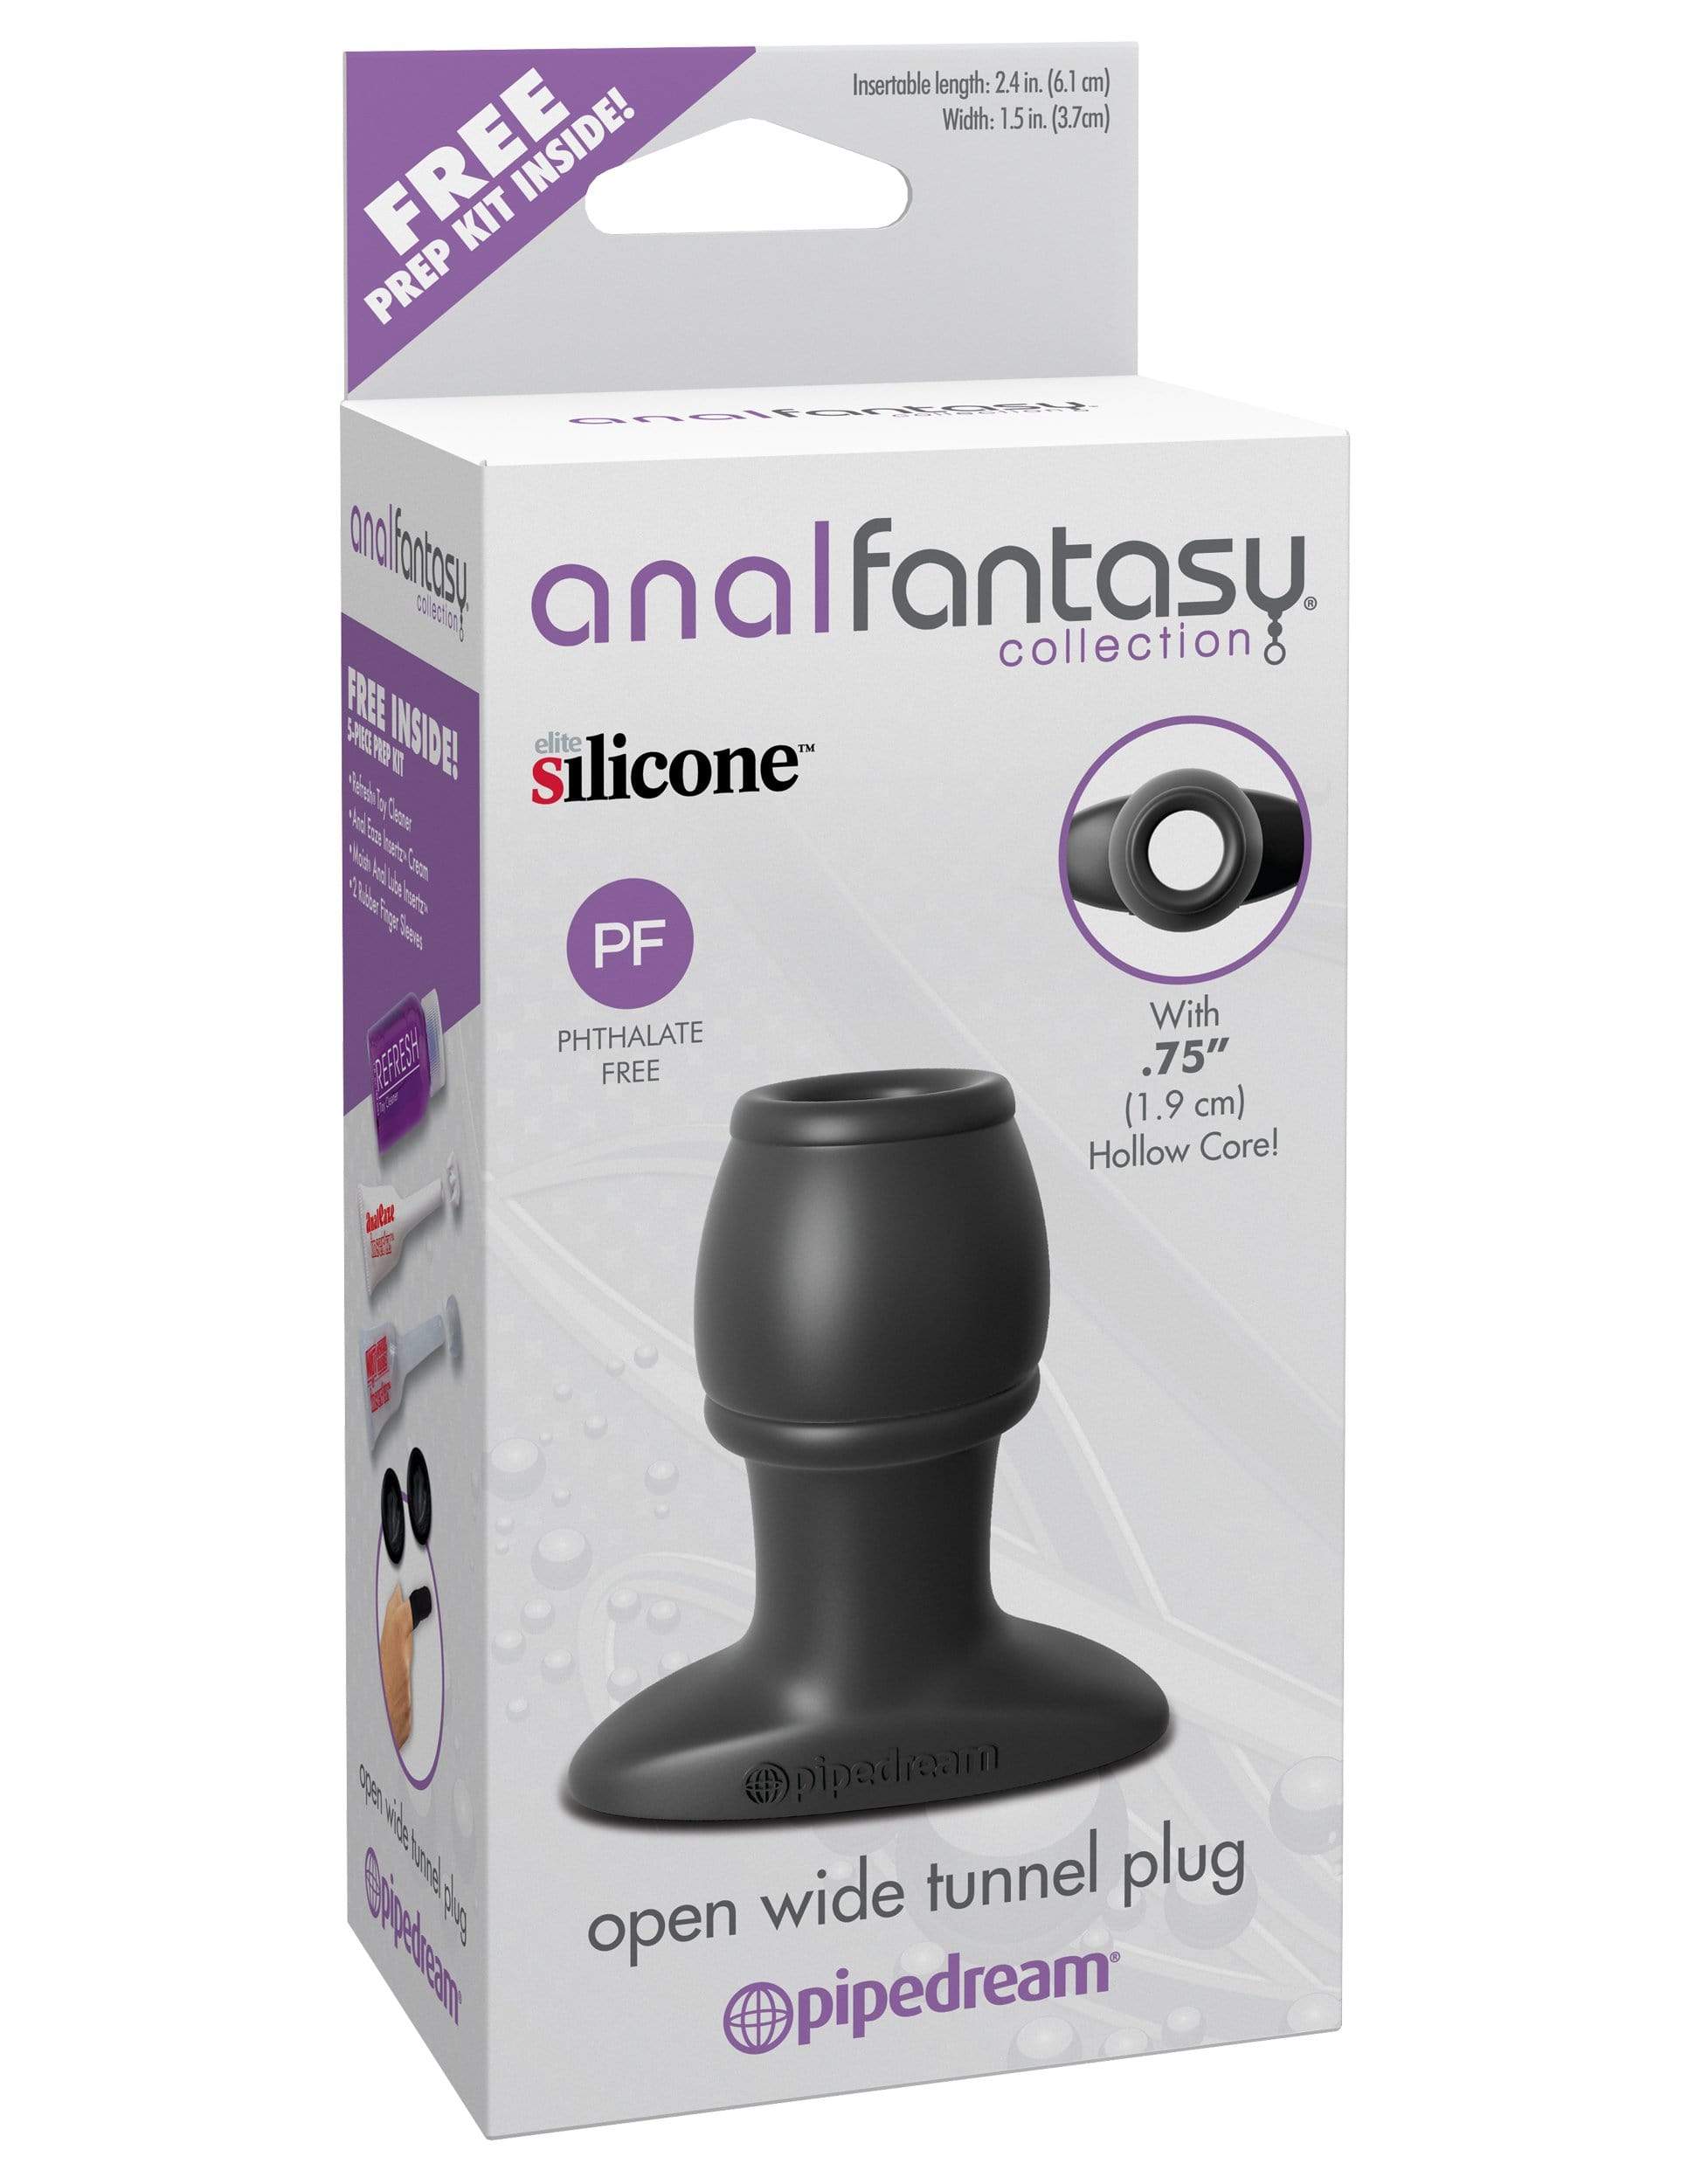 anal fantasy collection open wide tunnel plug